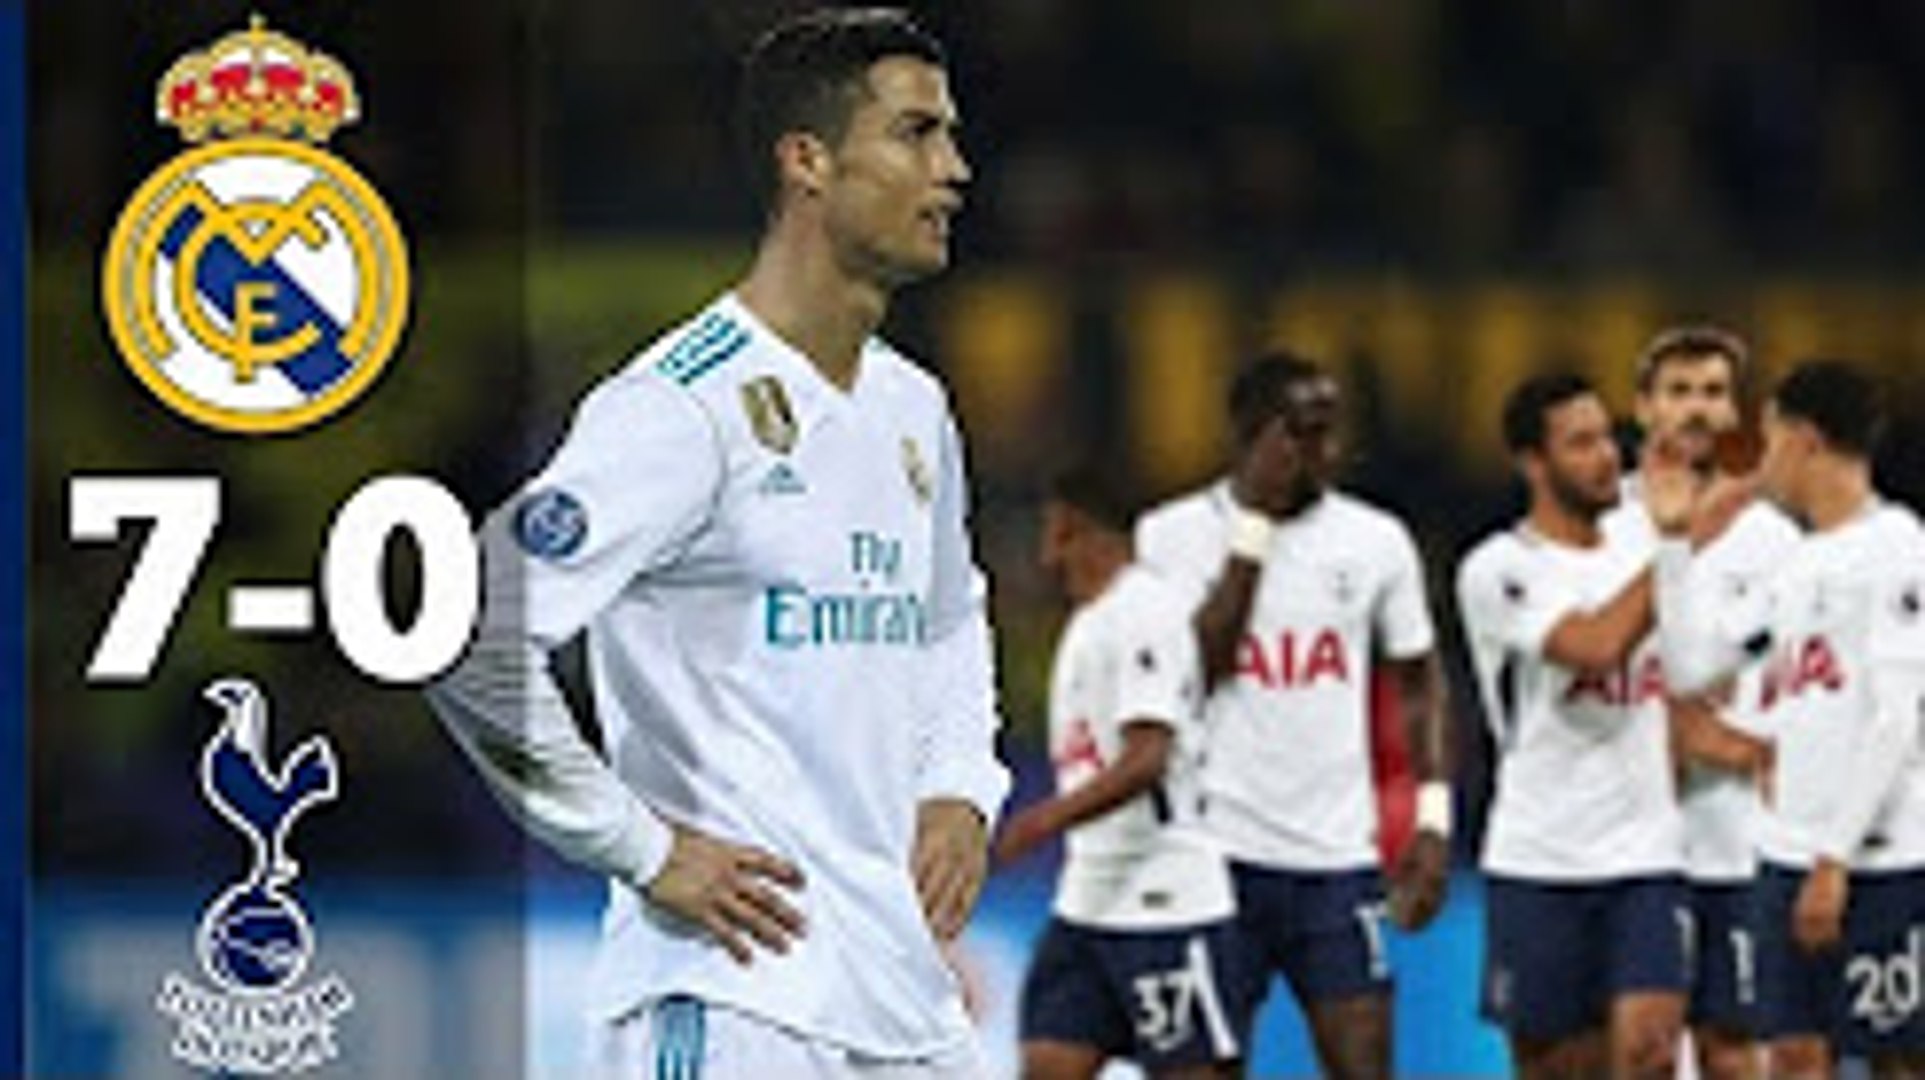 Real Madrid Vs Tottenham 7 0 All Goals Extended Highlights Last 3 Matches Hd Video Dailymotion